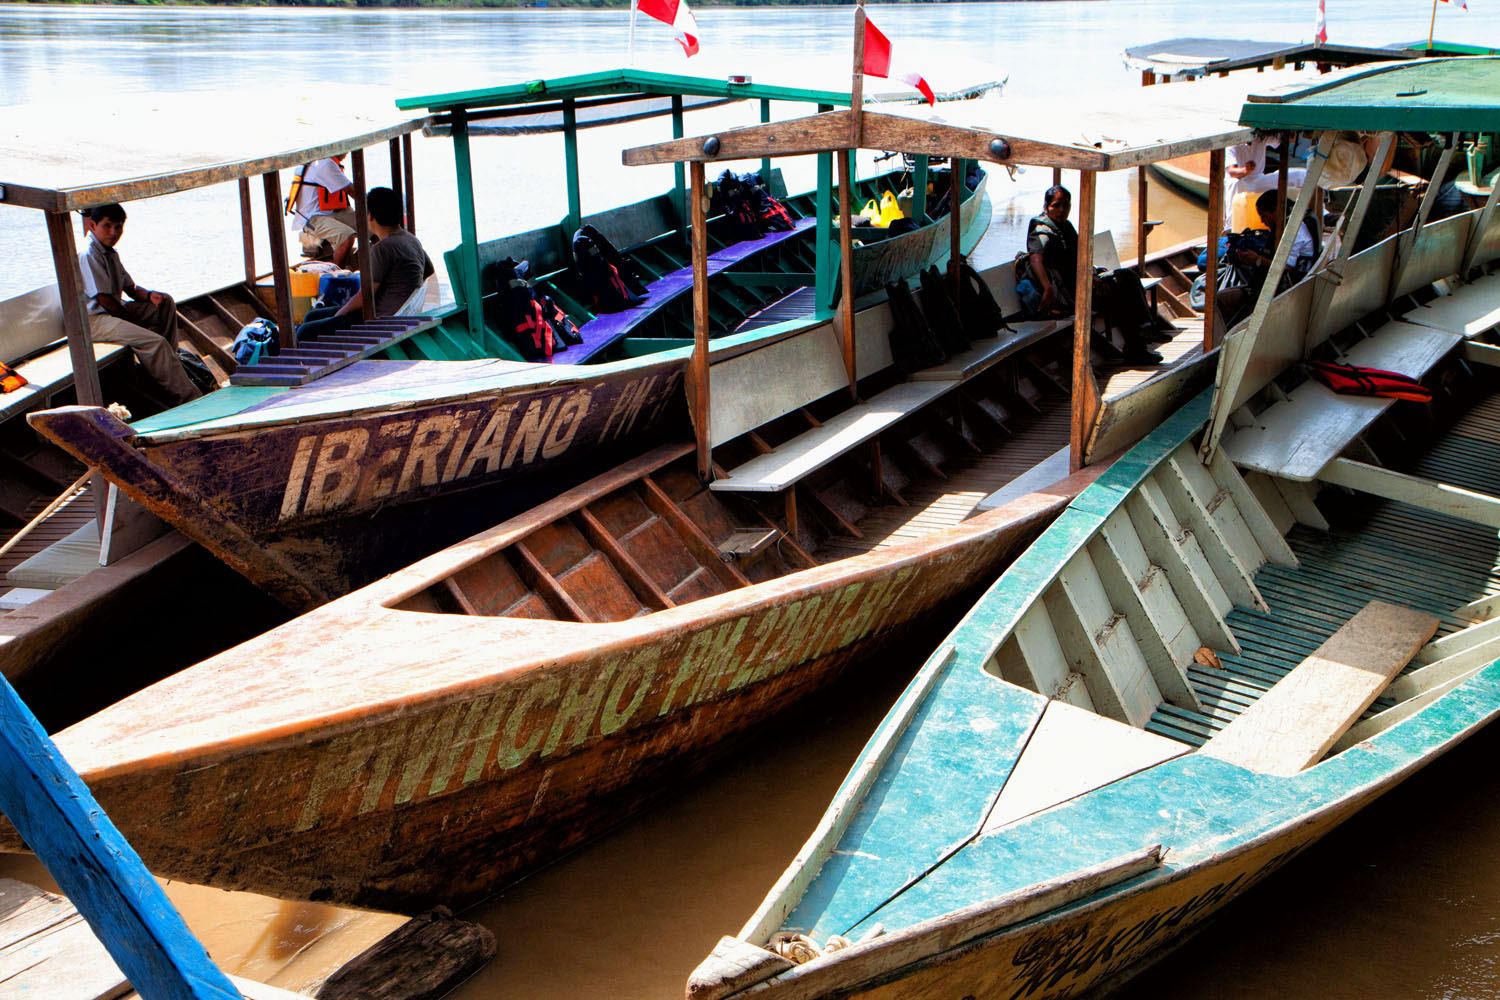 Boats in the Amazon